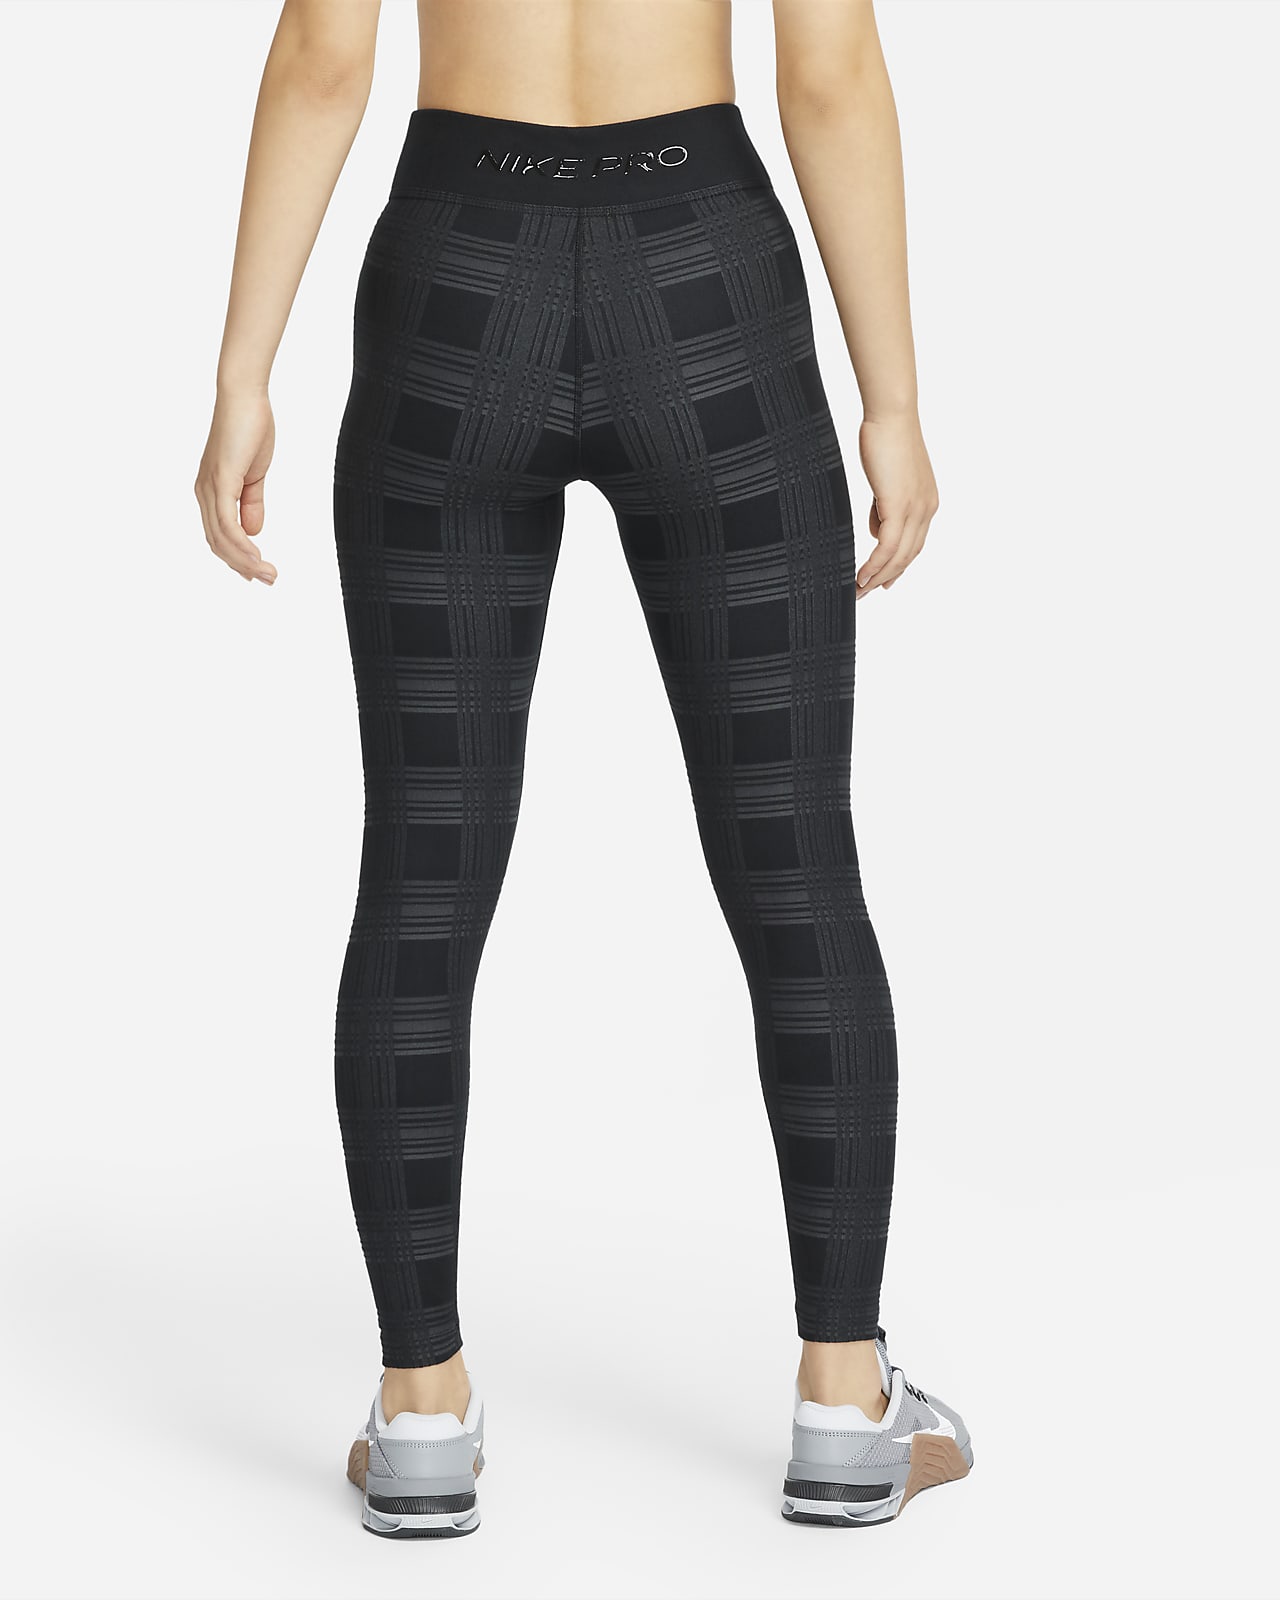 Specificity Occurrence catch up Nike Pro Women's Leggings. Nike.com